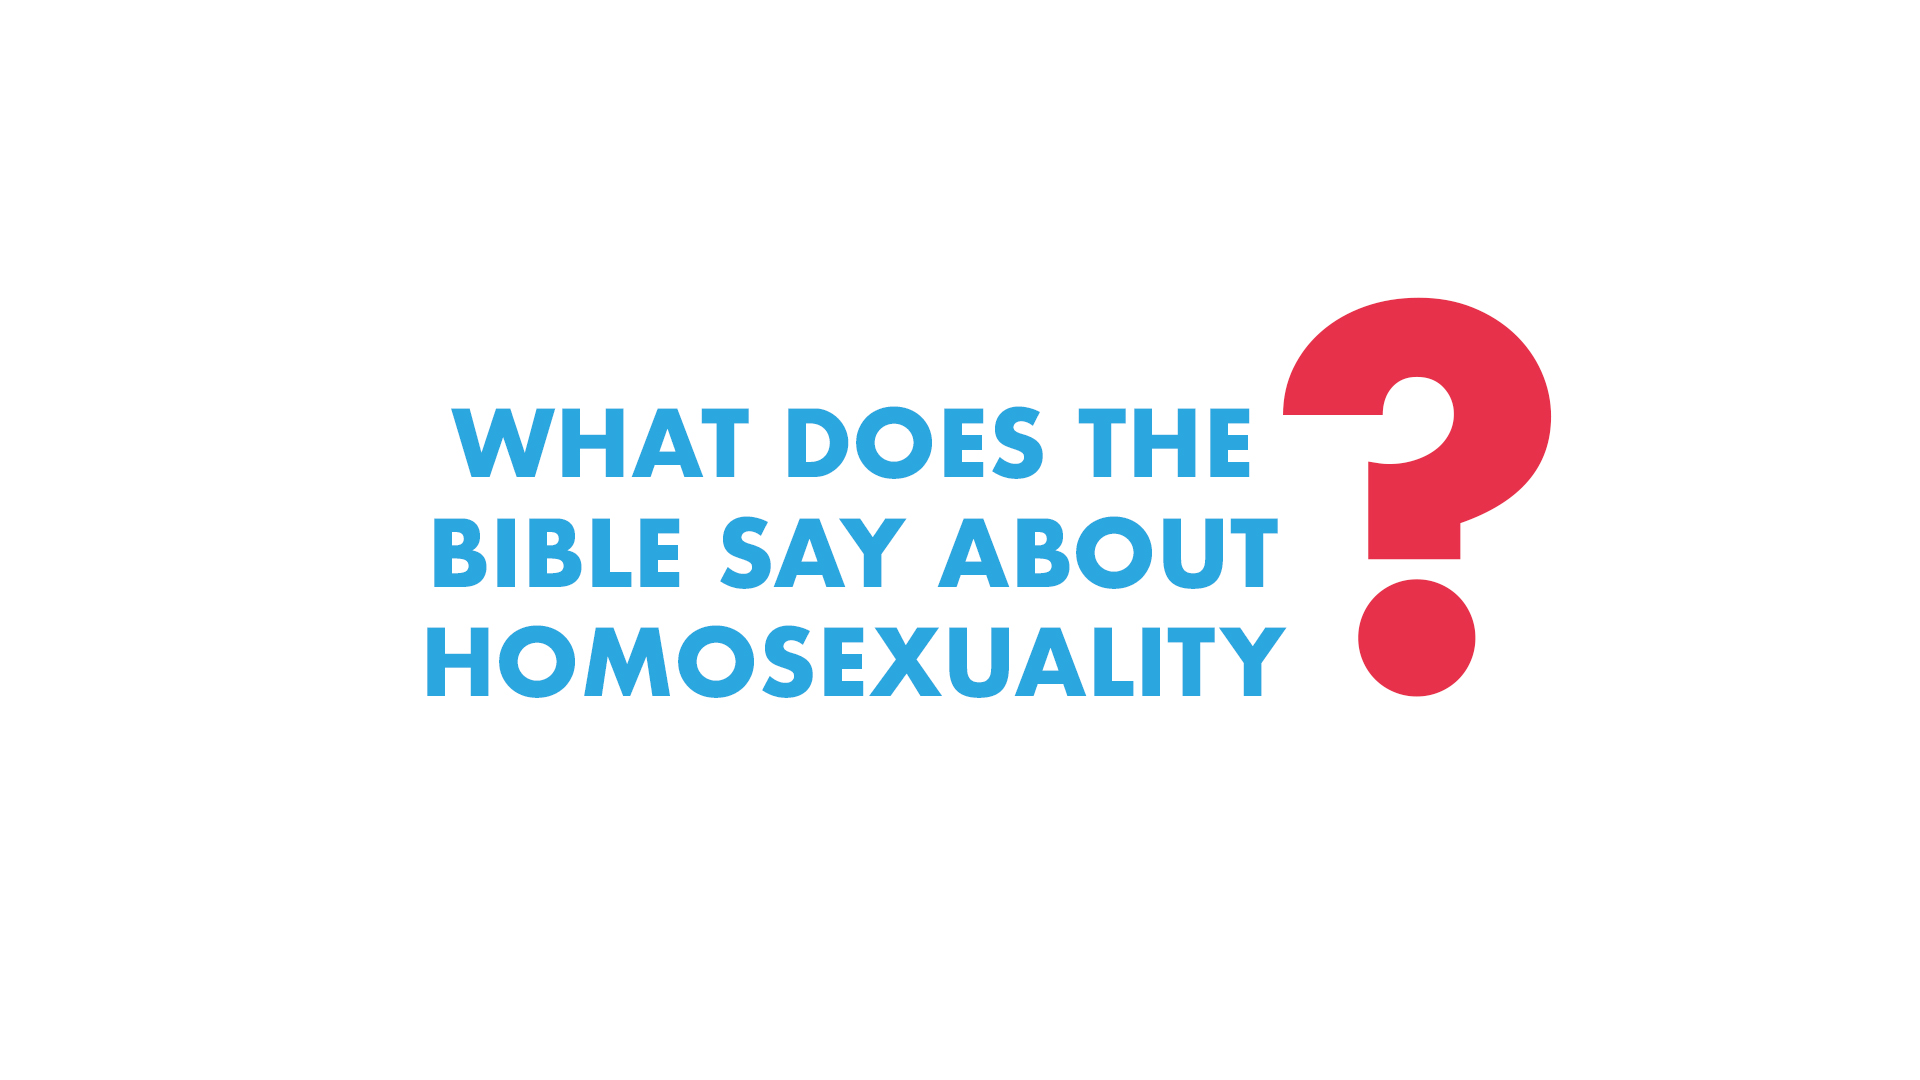 What does the Bible Say about Homosexuality?